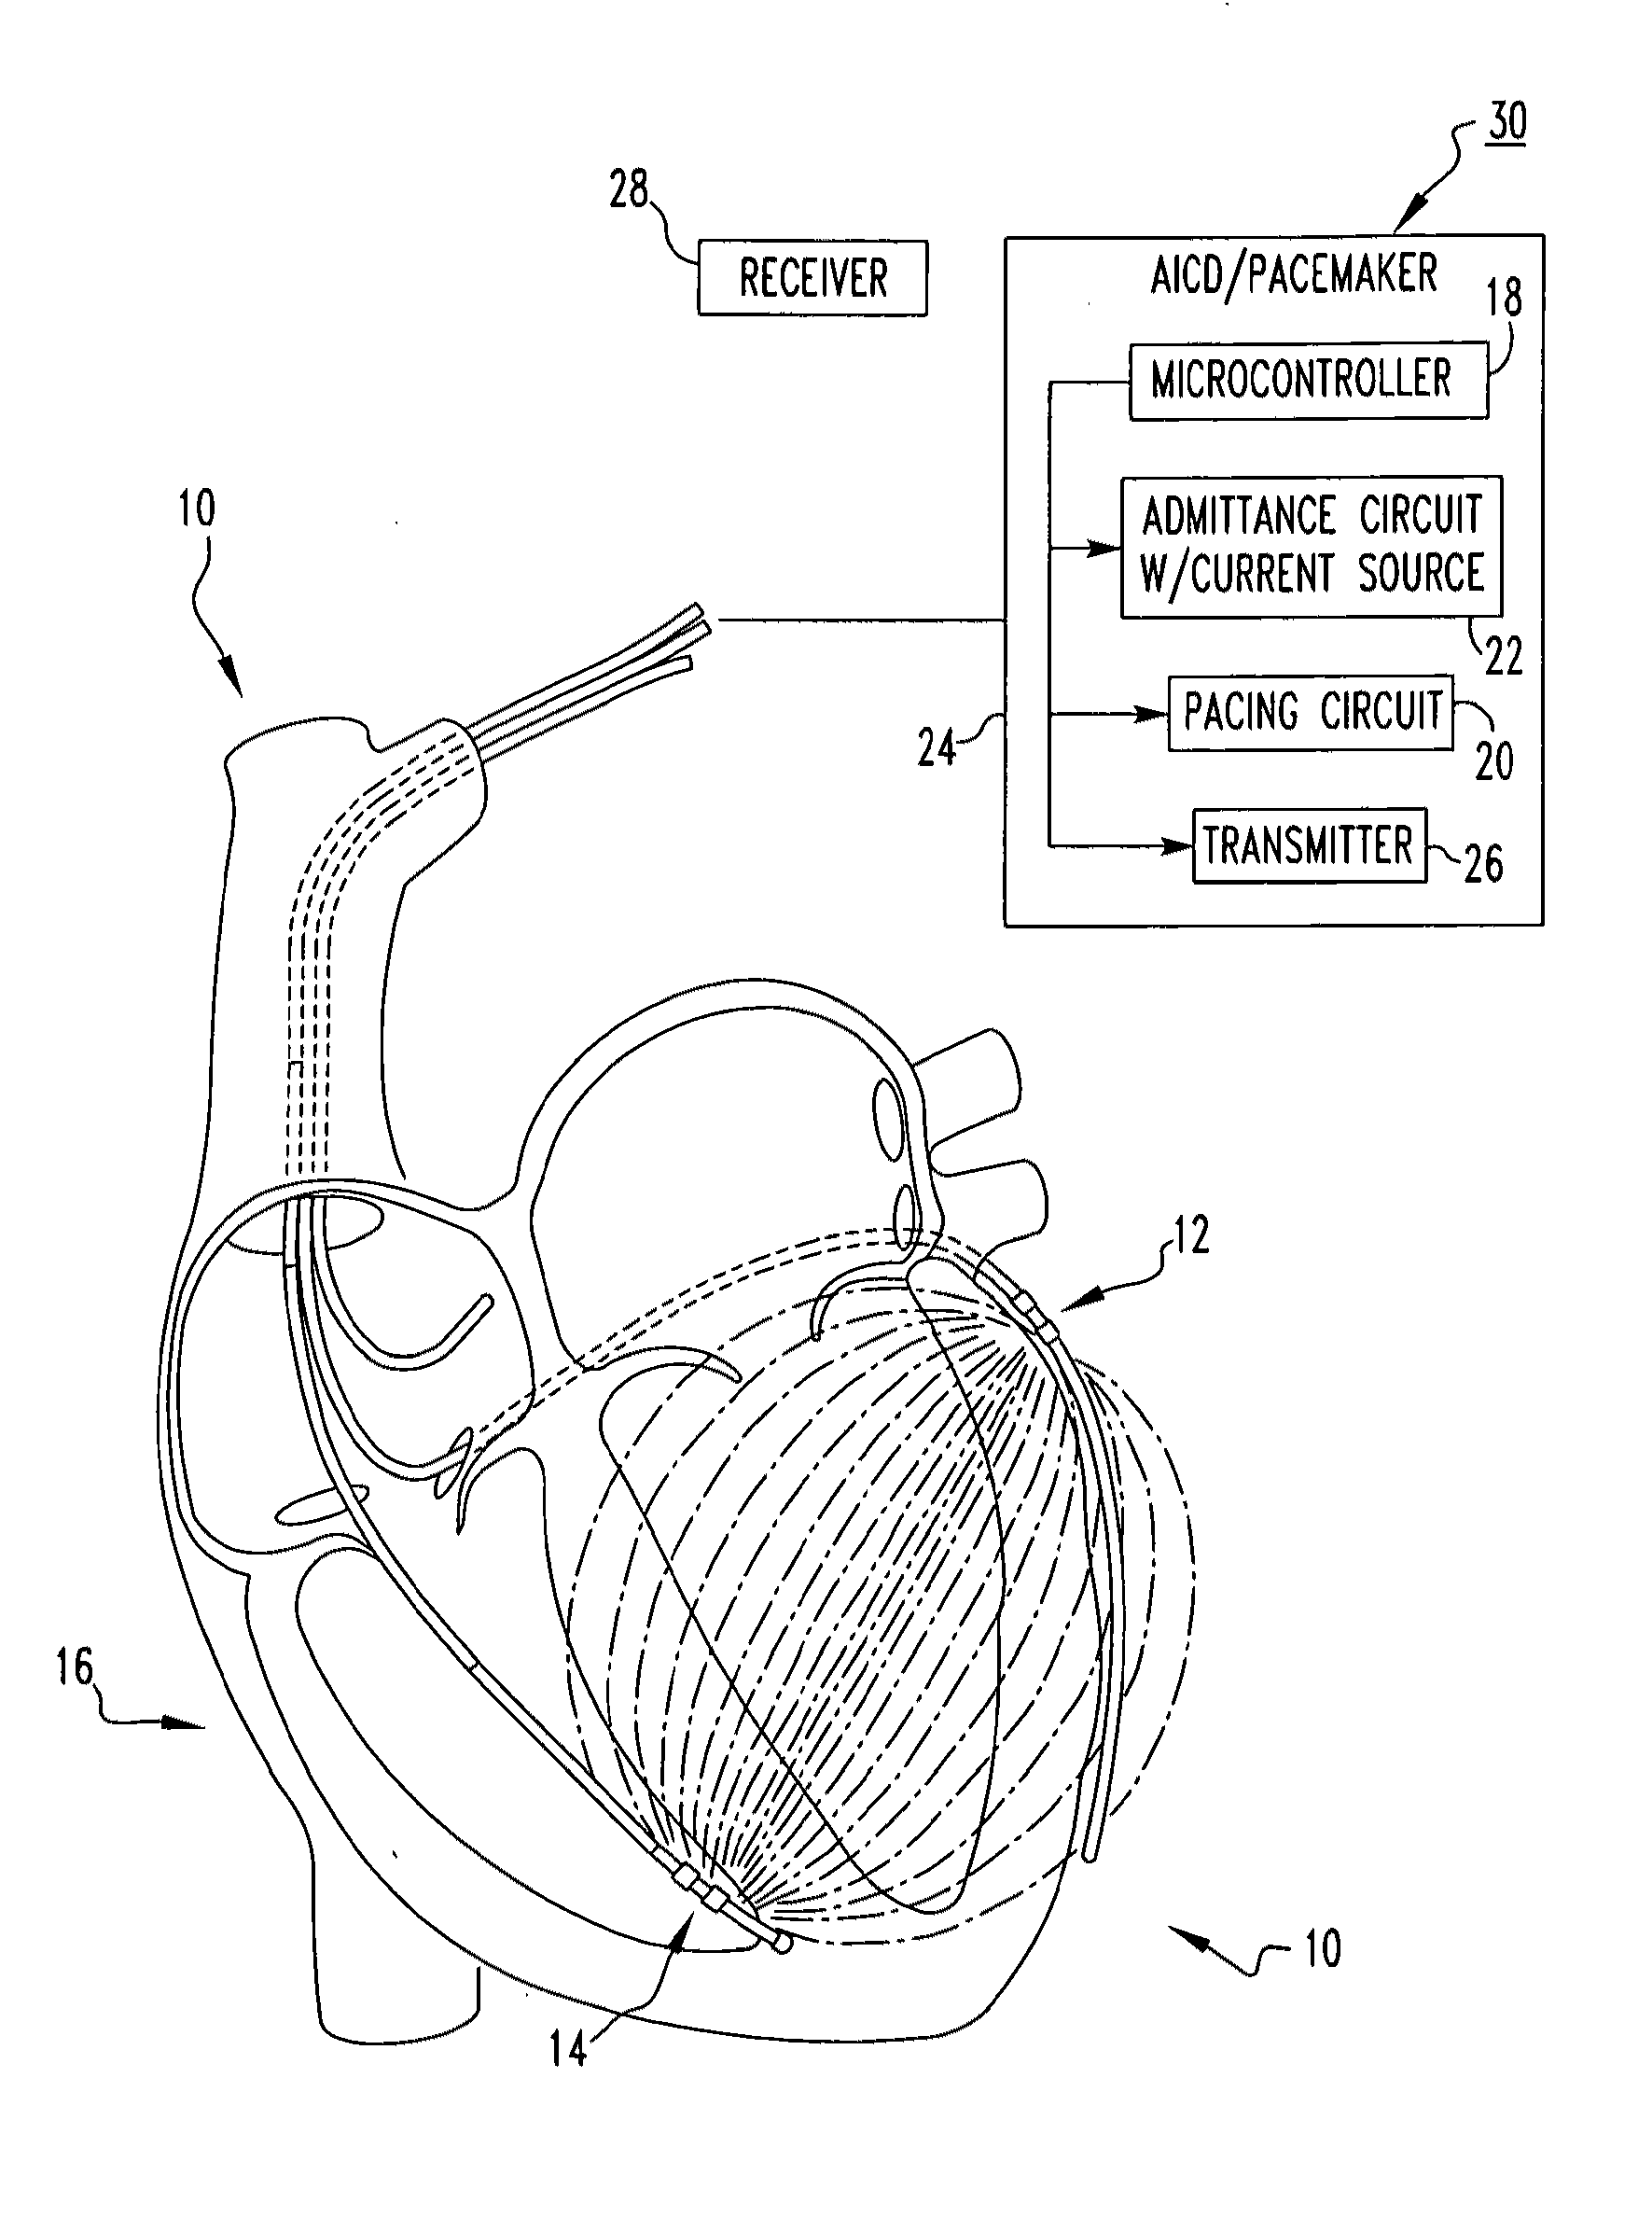 Admittance measurement for tuning bi-ventricular pacemakers